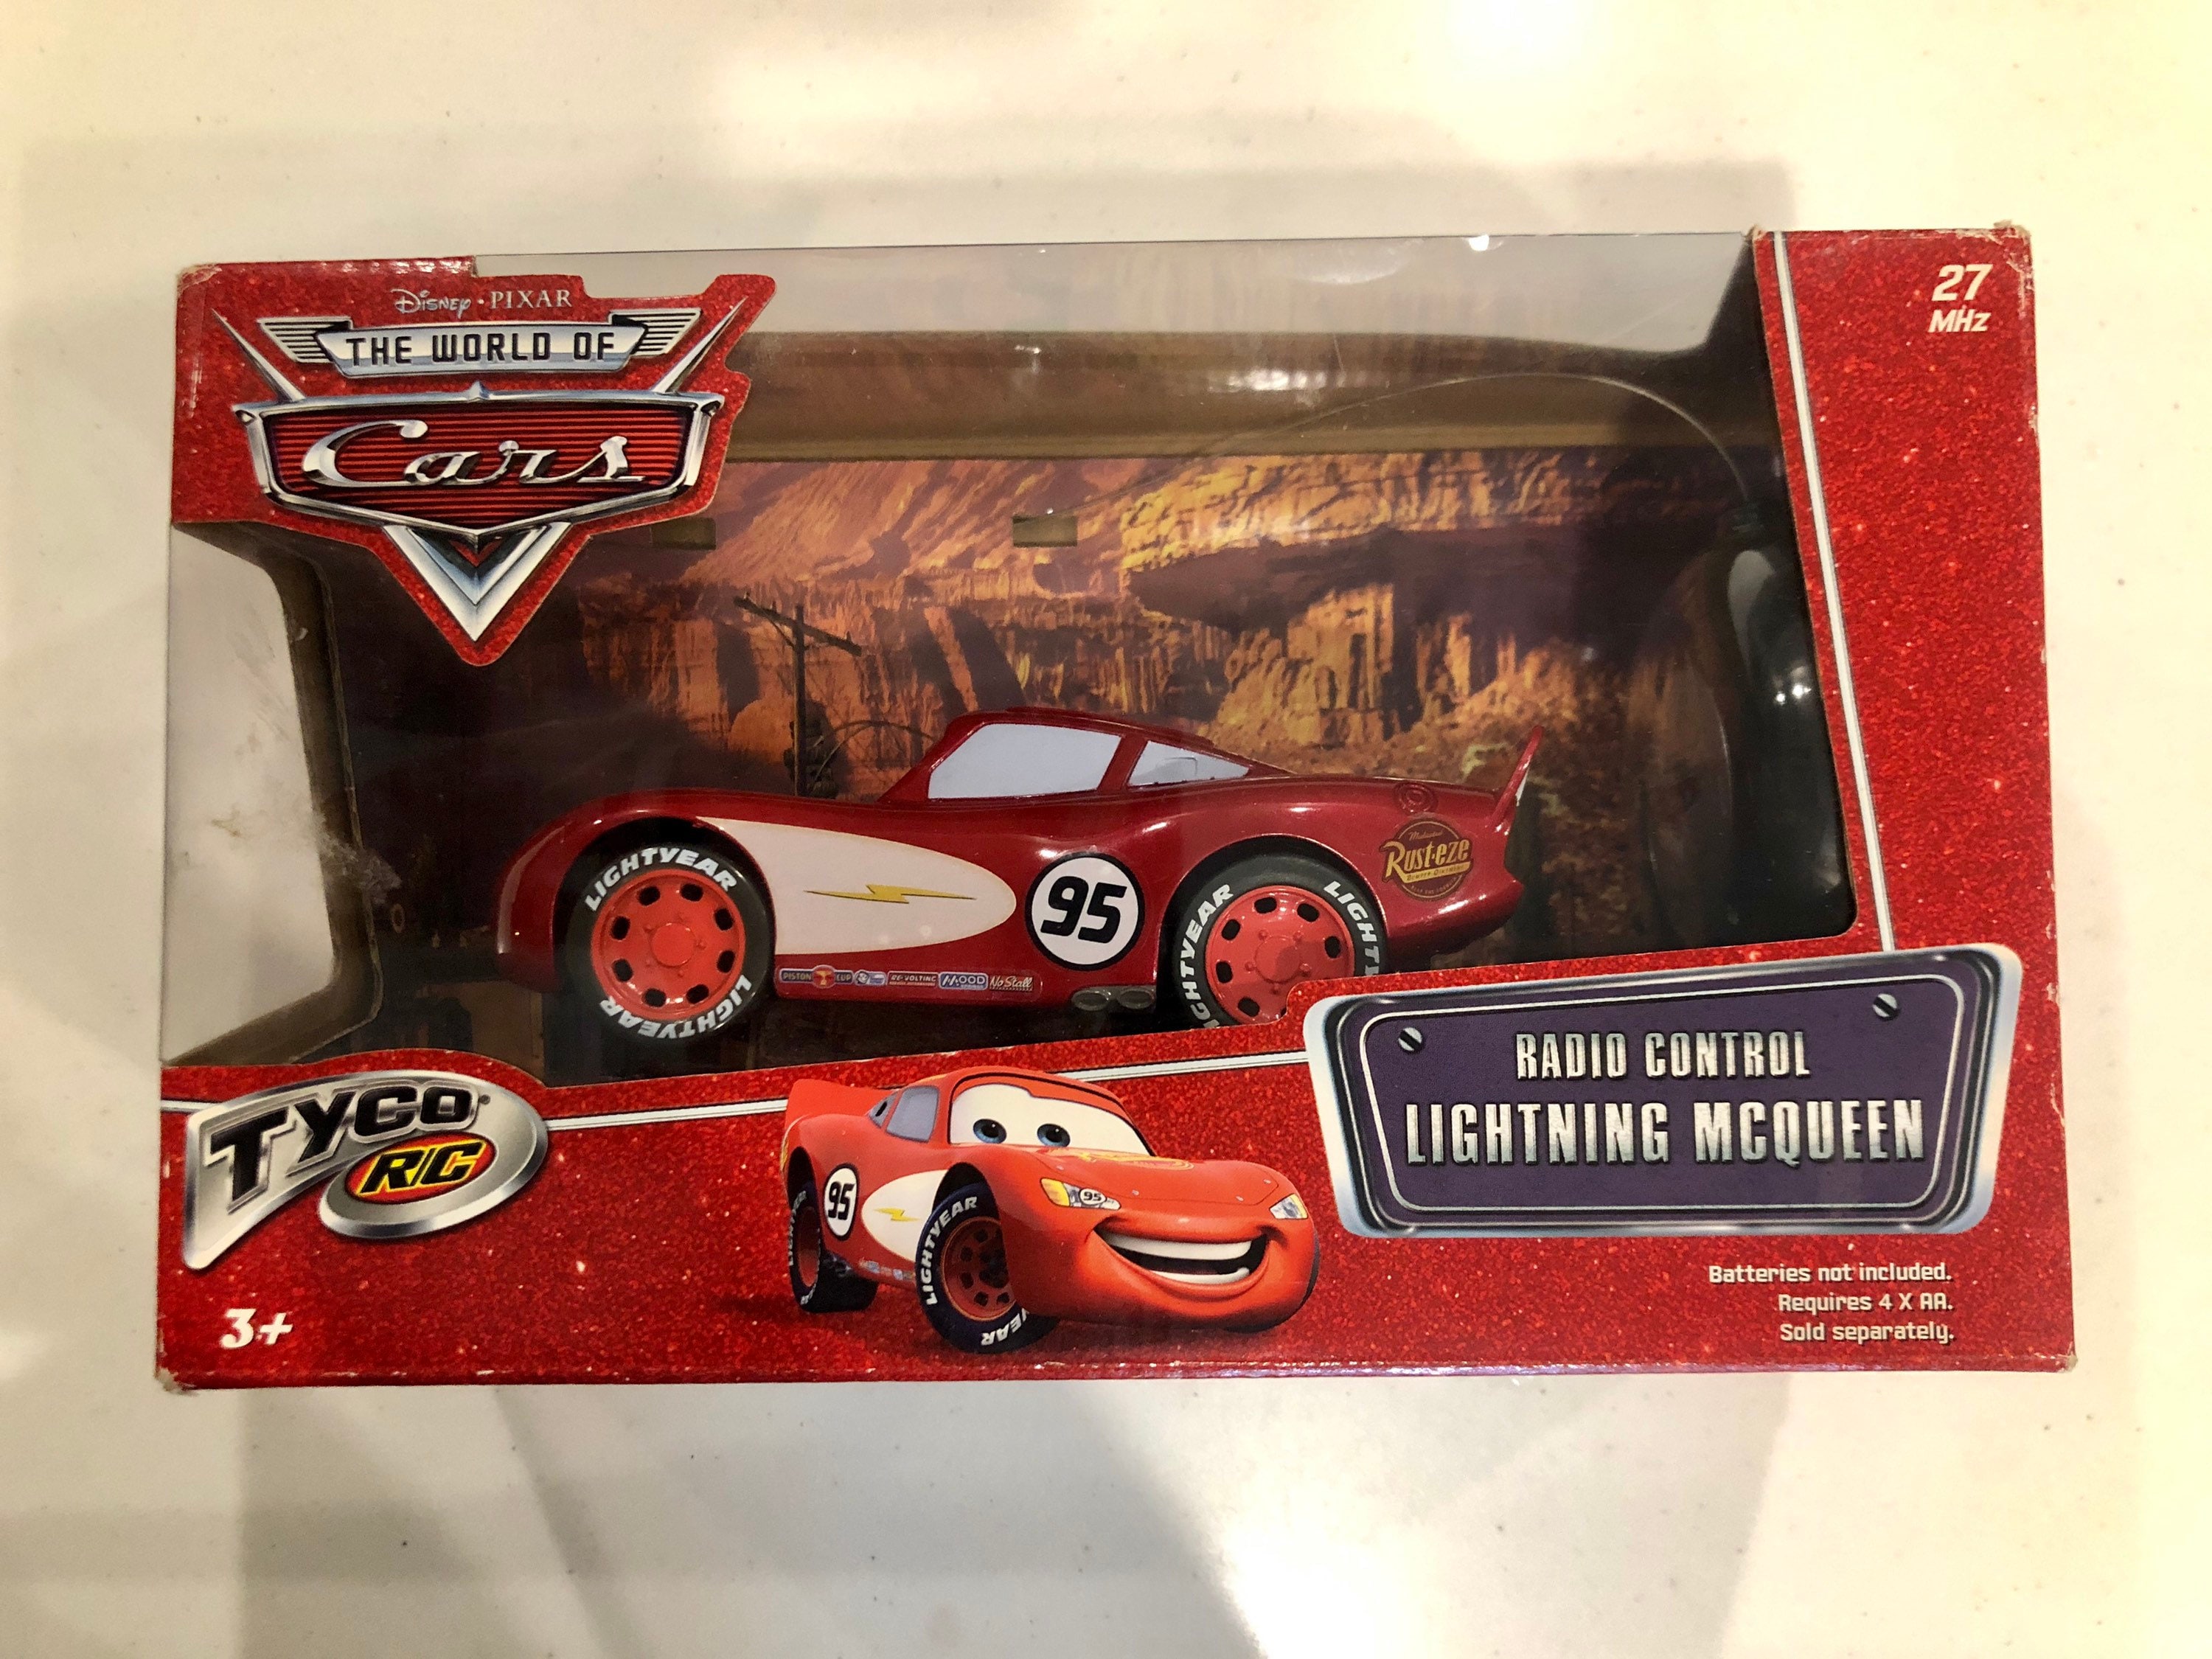 Remote Control Lightning Mcqueen Tyco RC New in the Original Box - Etsy